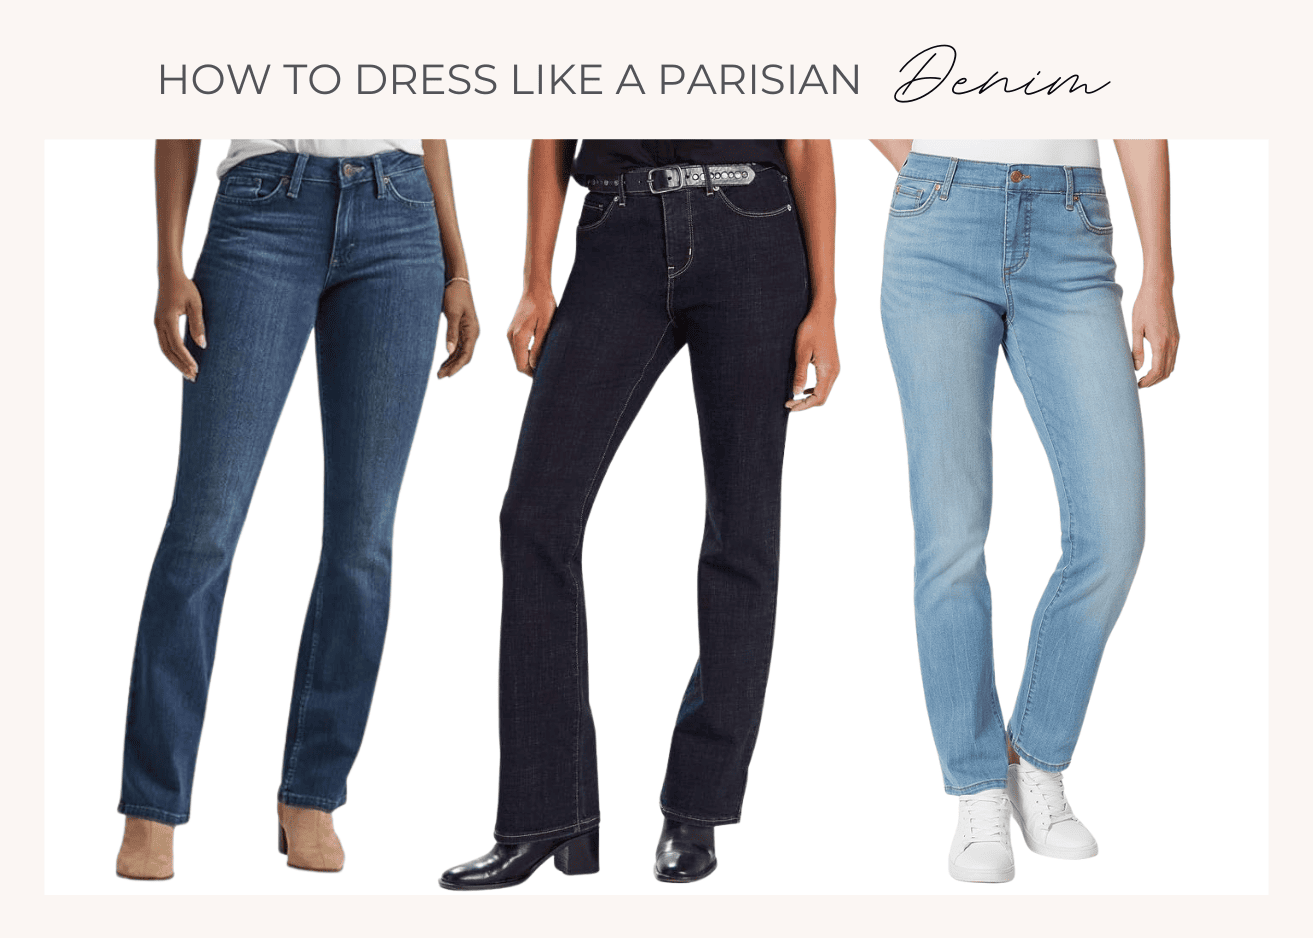 Collage image featuring denim titled "How to dress like a parisian denim"